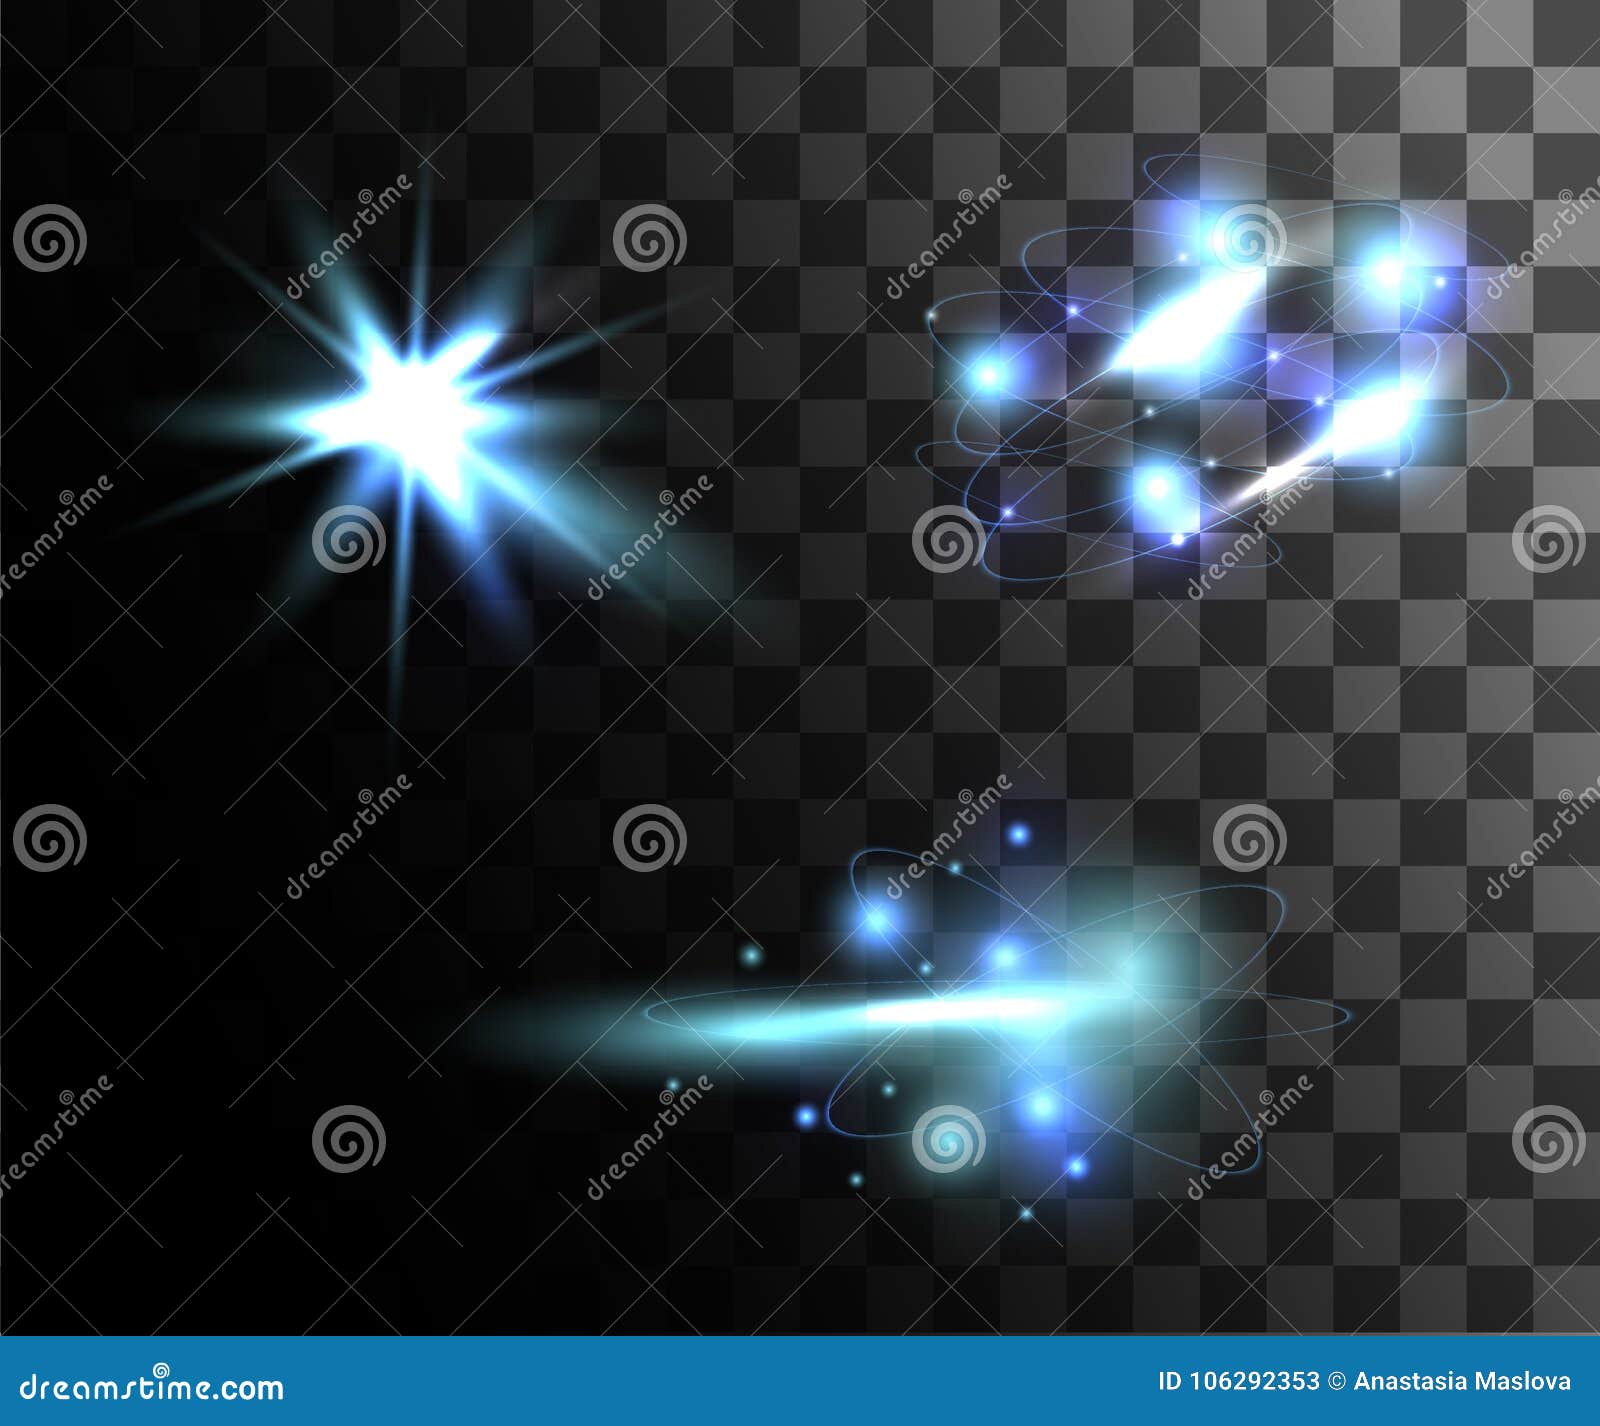 set of blue  light effects glowing light rings with particles decoration  on the transparent background website page